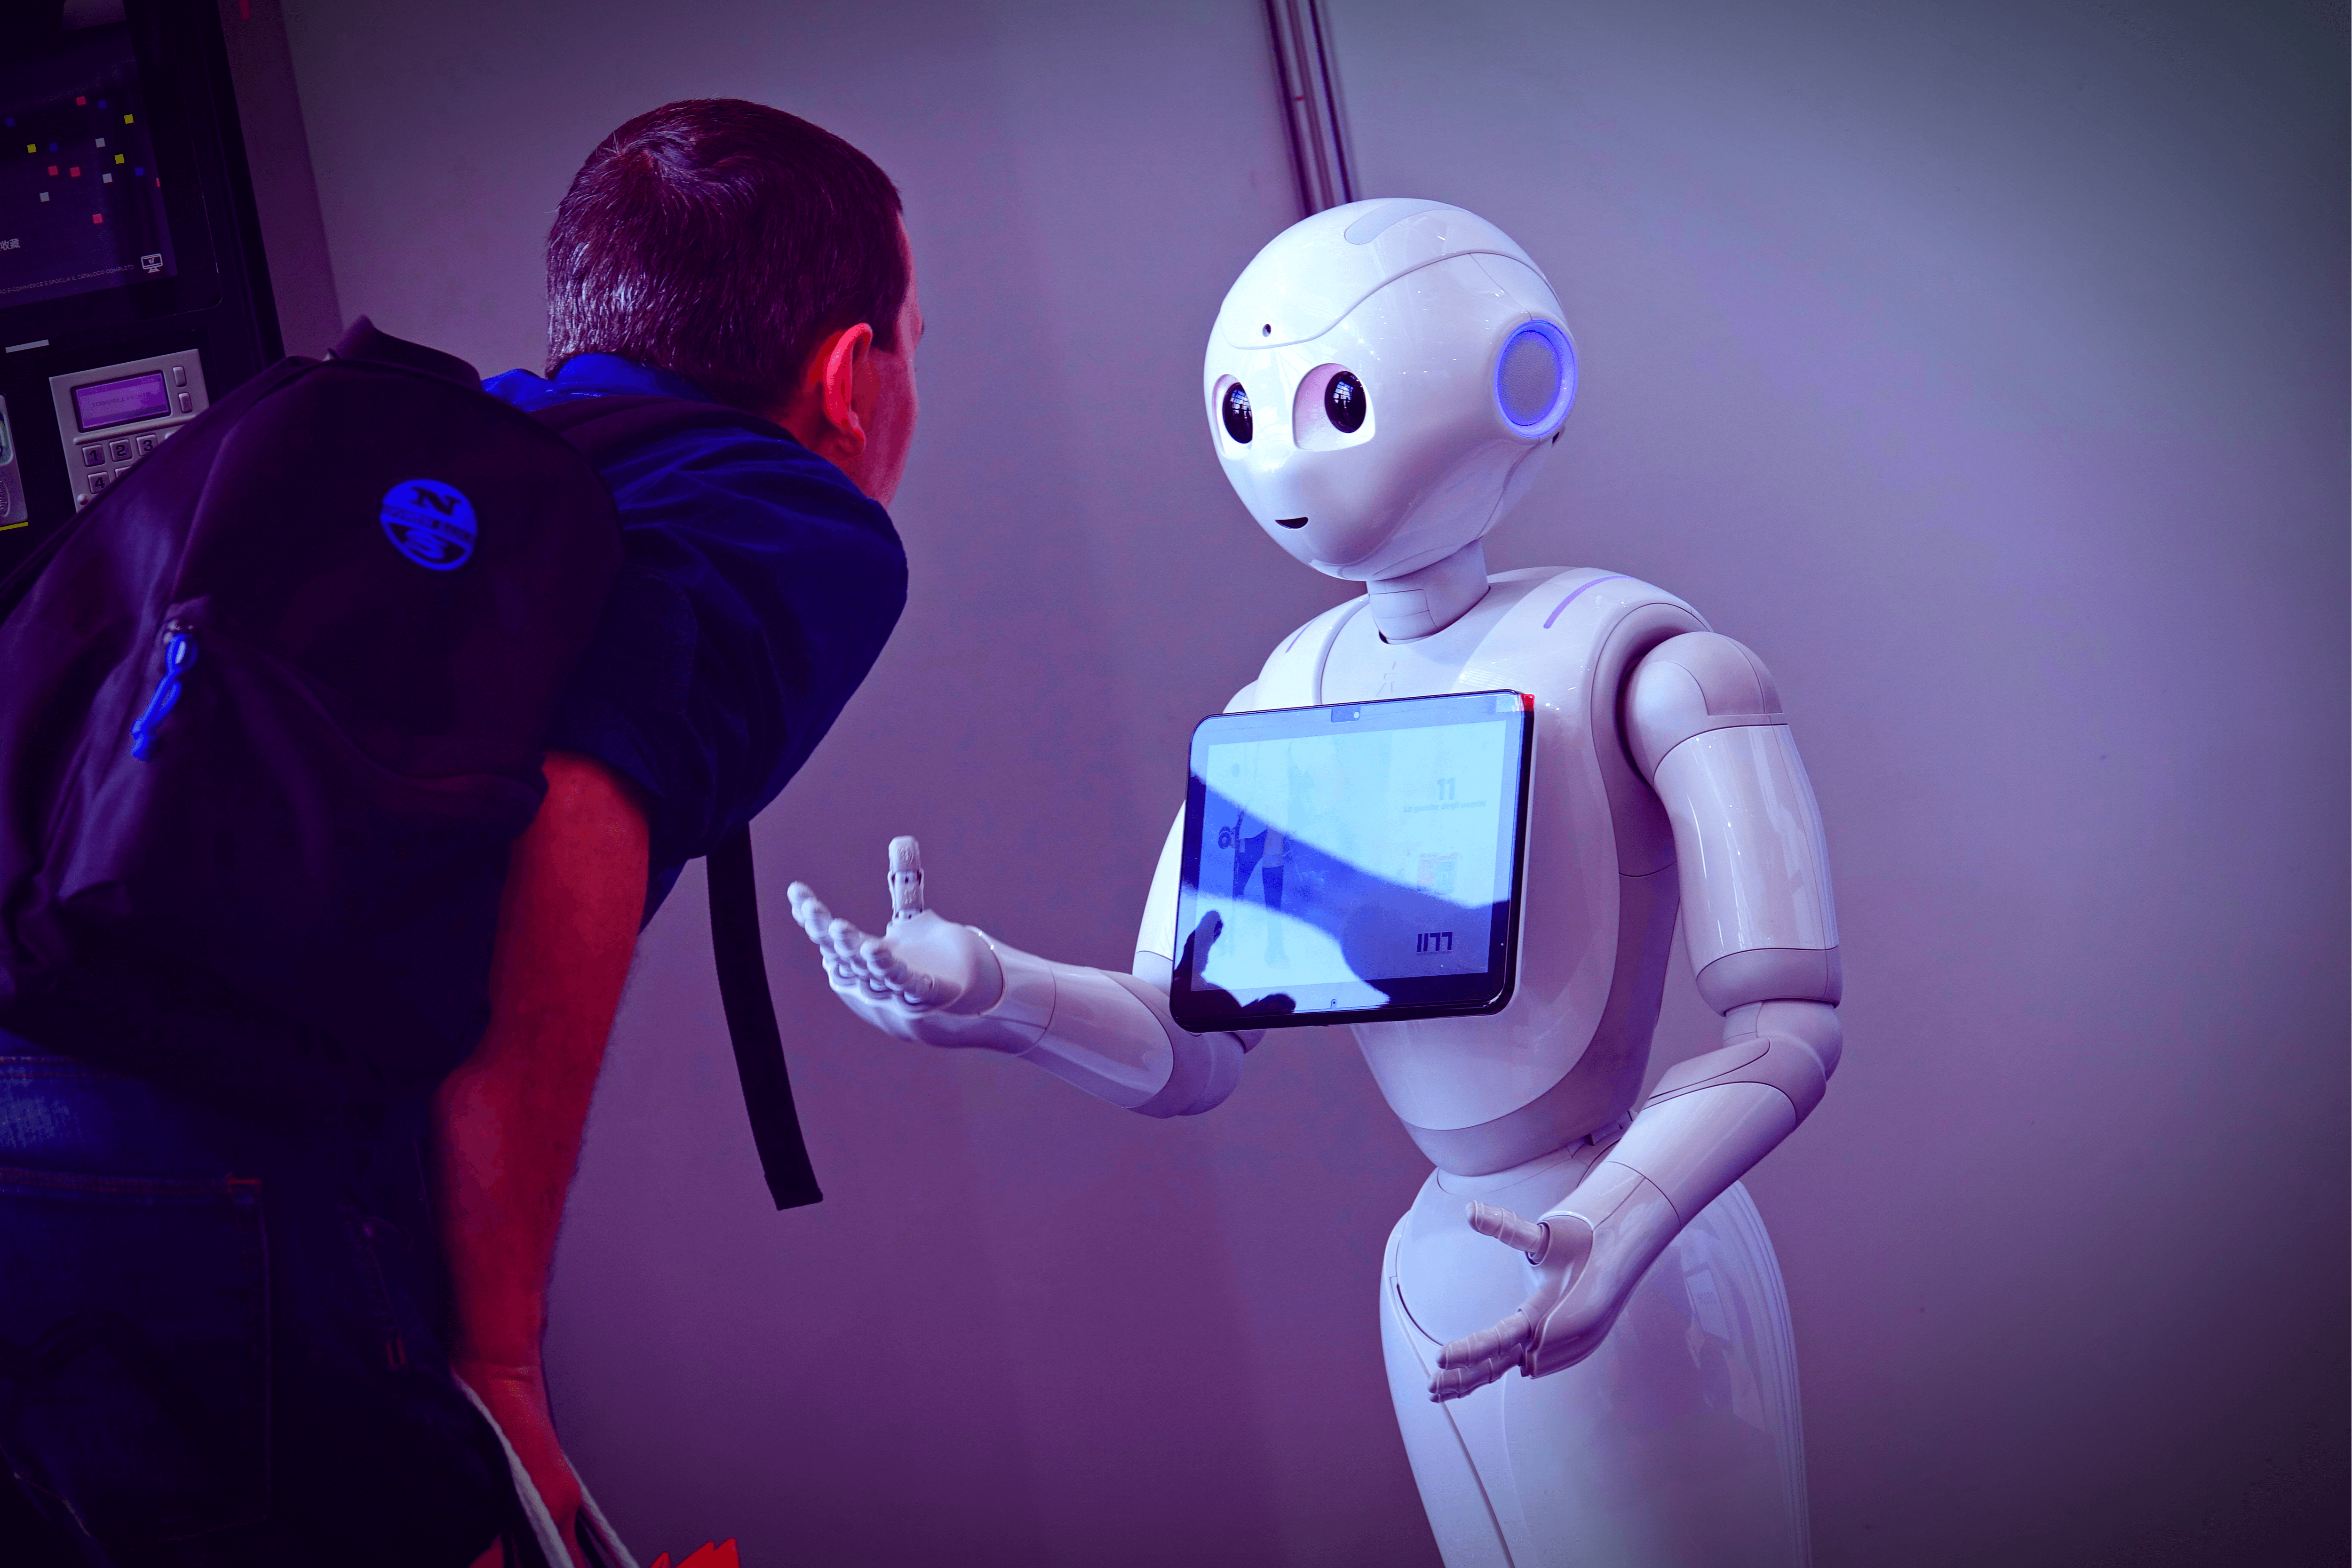 "Pepper" robot assistant with information screen in duty to give information